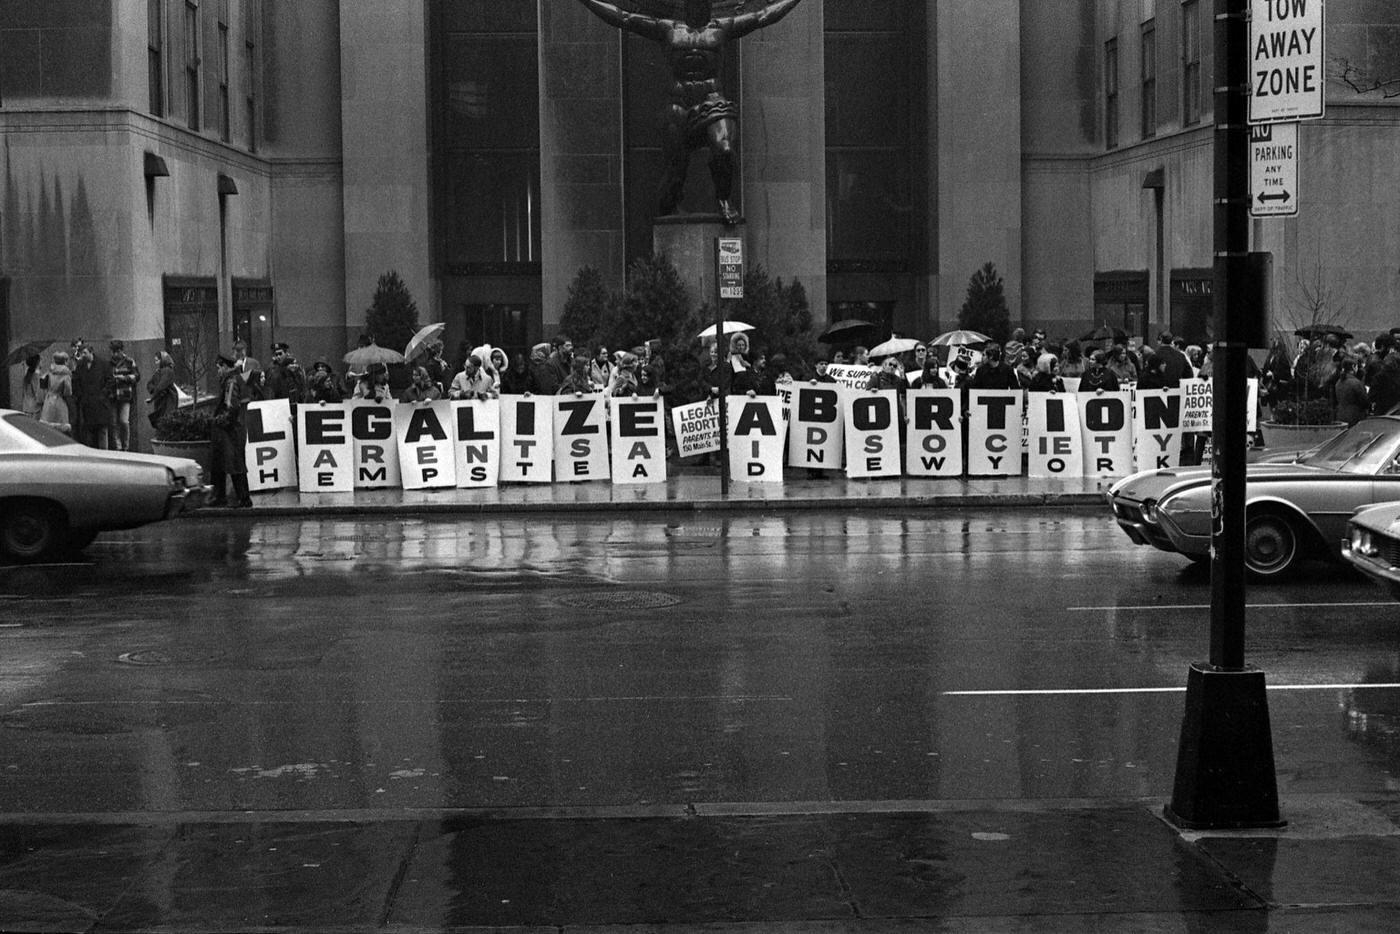 Activists Hold Signs That Read 'Legalize Abortion' In Front Of The Atlas Sculpture At Rockefeller Center, Manhattan, 1968